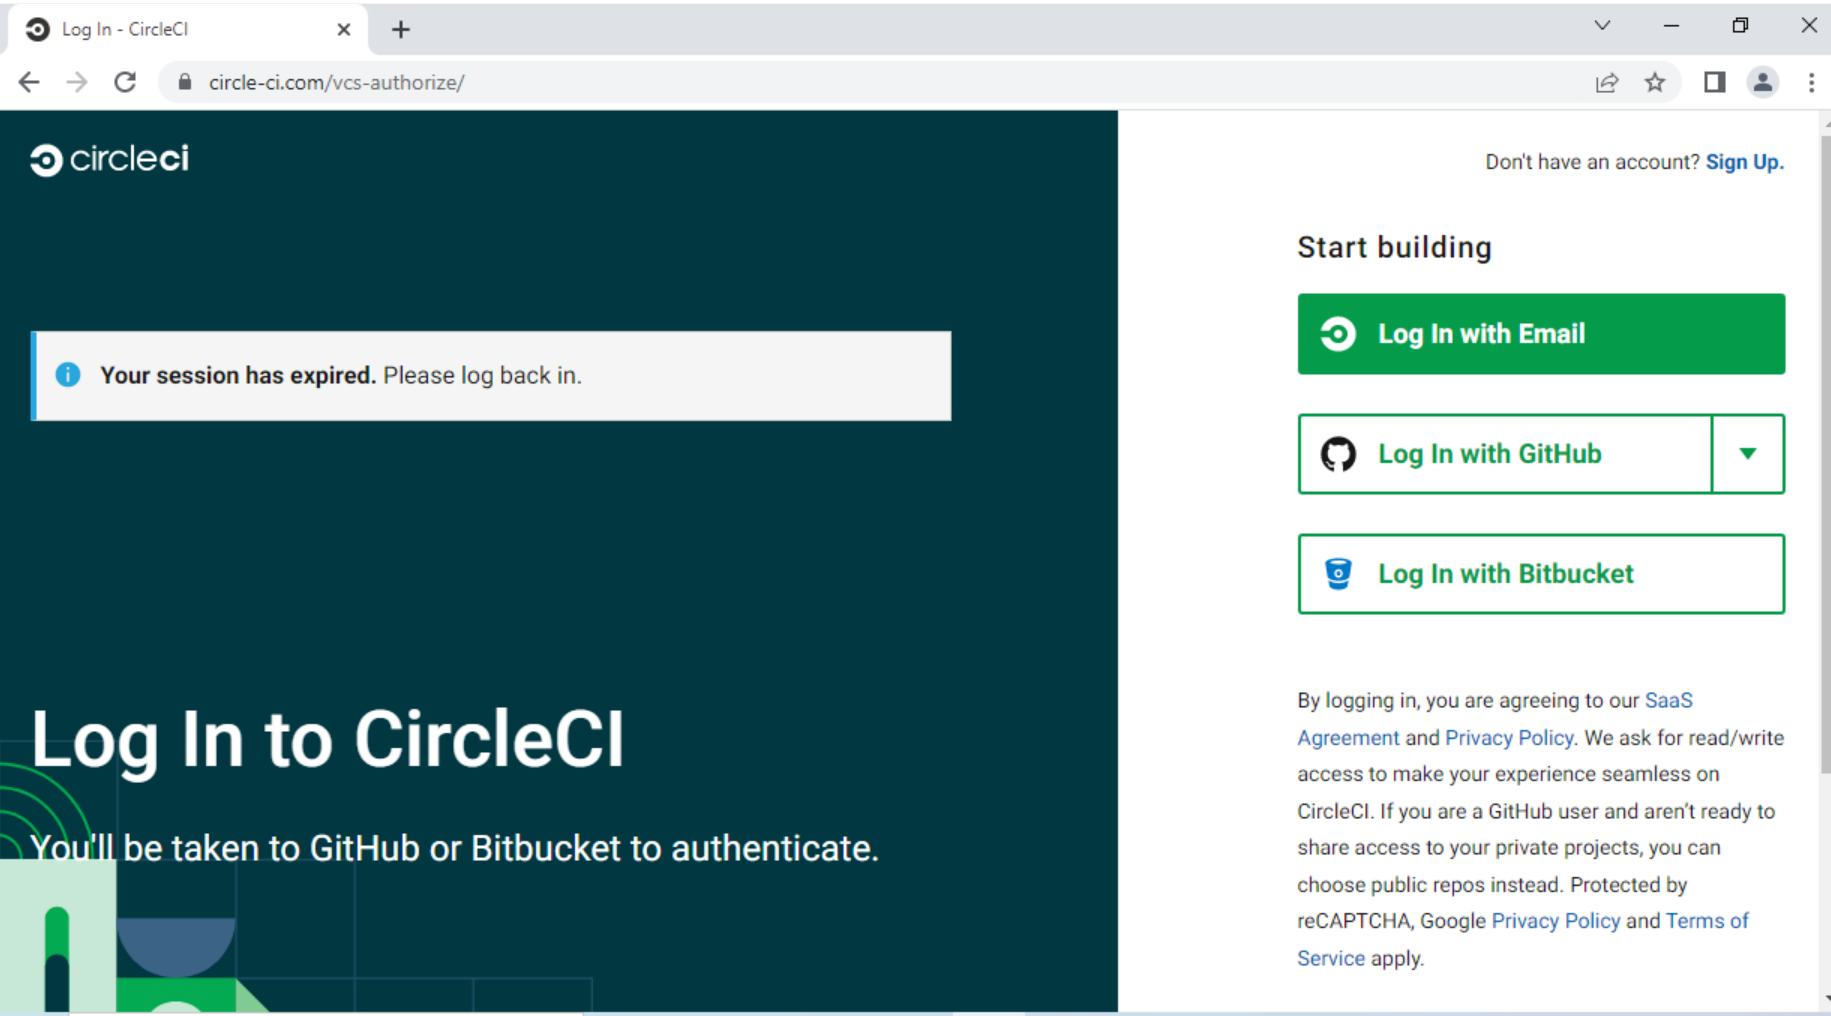 Image 6 is a screenshot mimicking the landing page for circle-ci. From this landing page the user would then have their credentials stolen after logging in. 